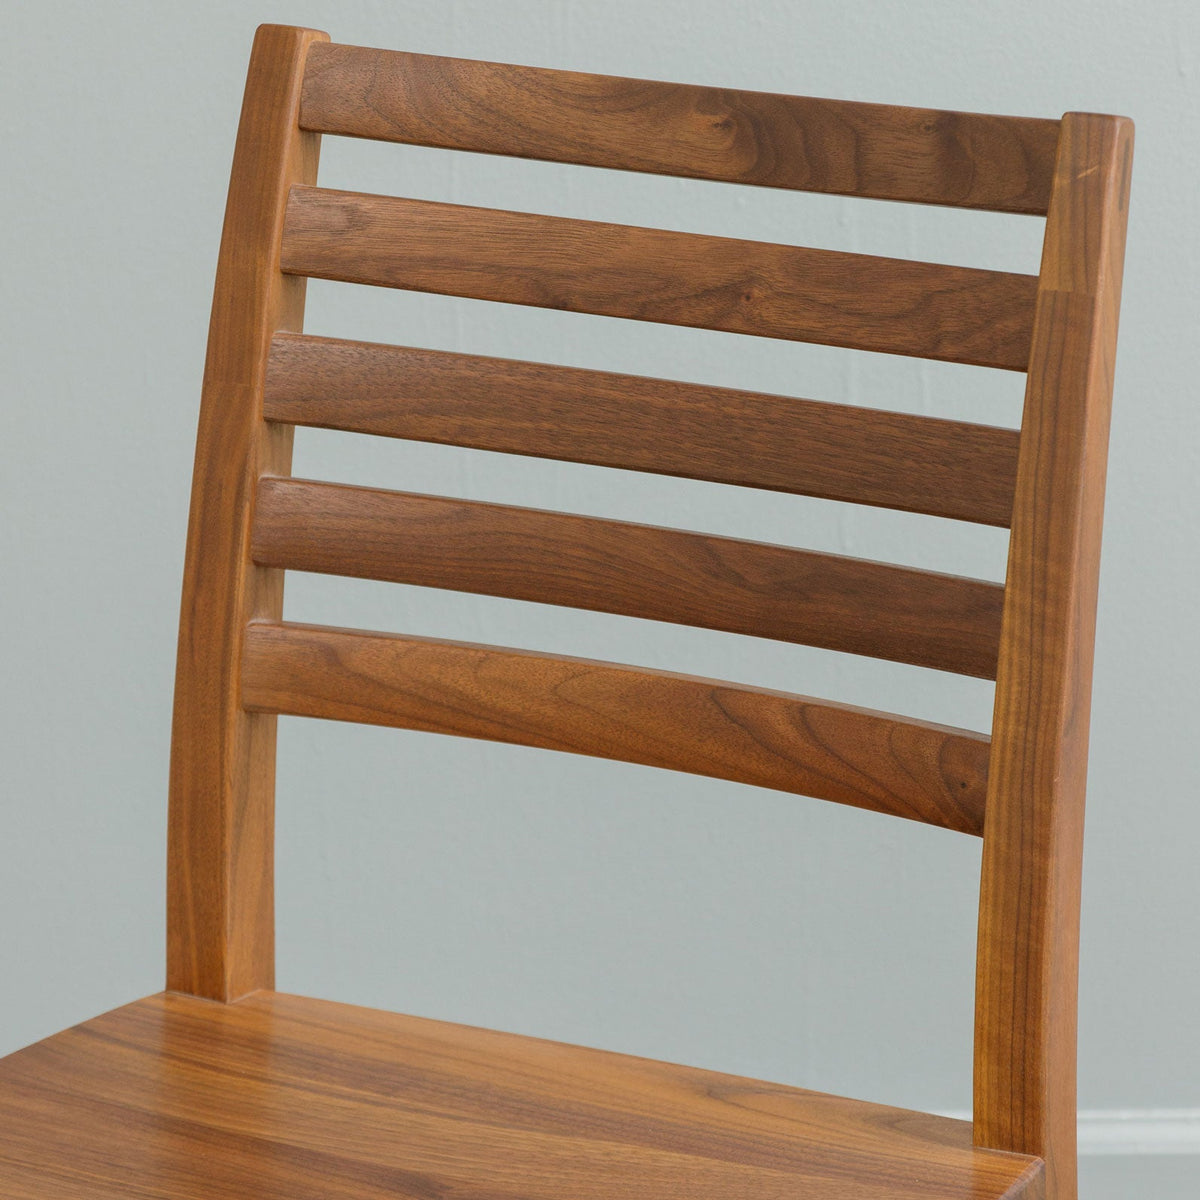 Rettew Dining Chair - snyders.furniture